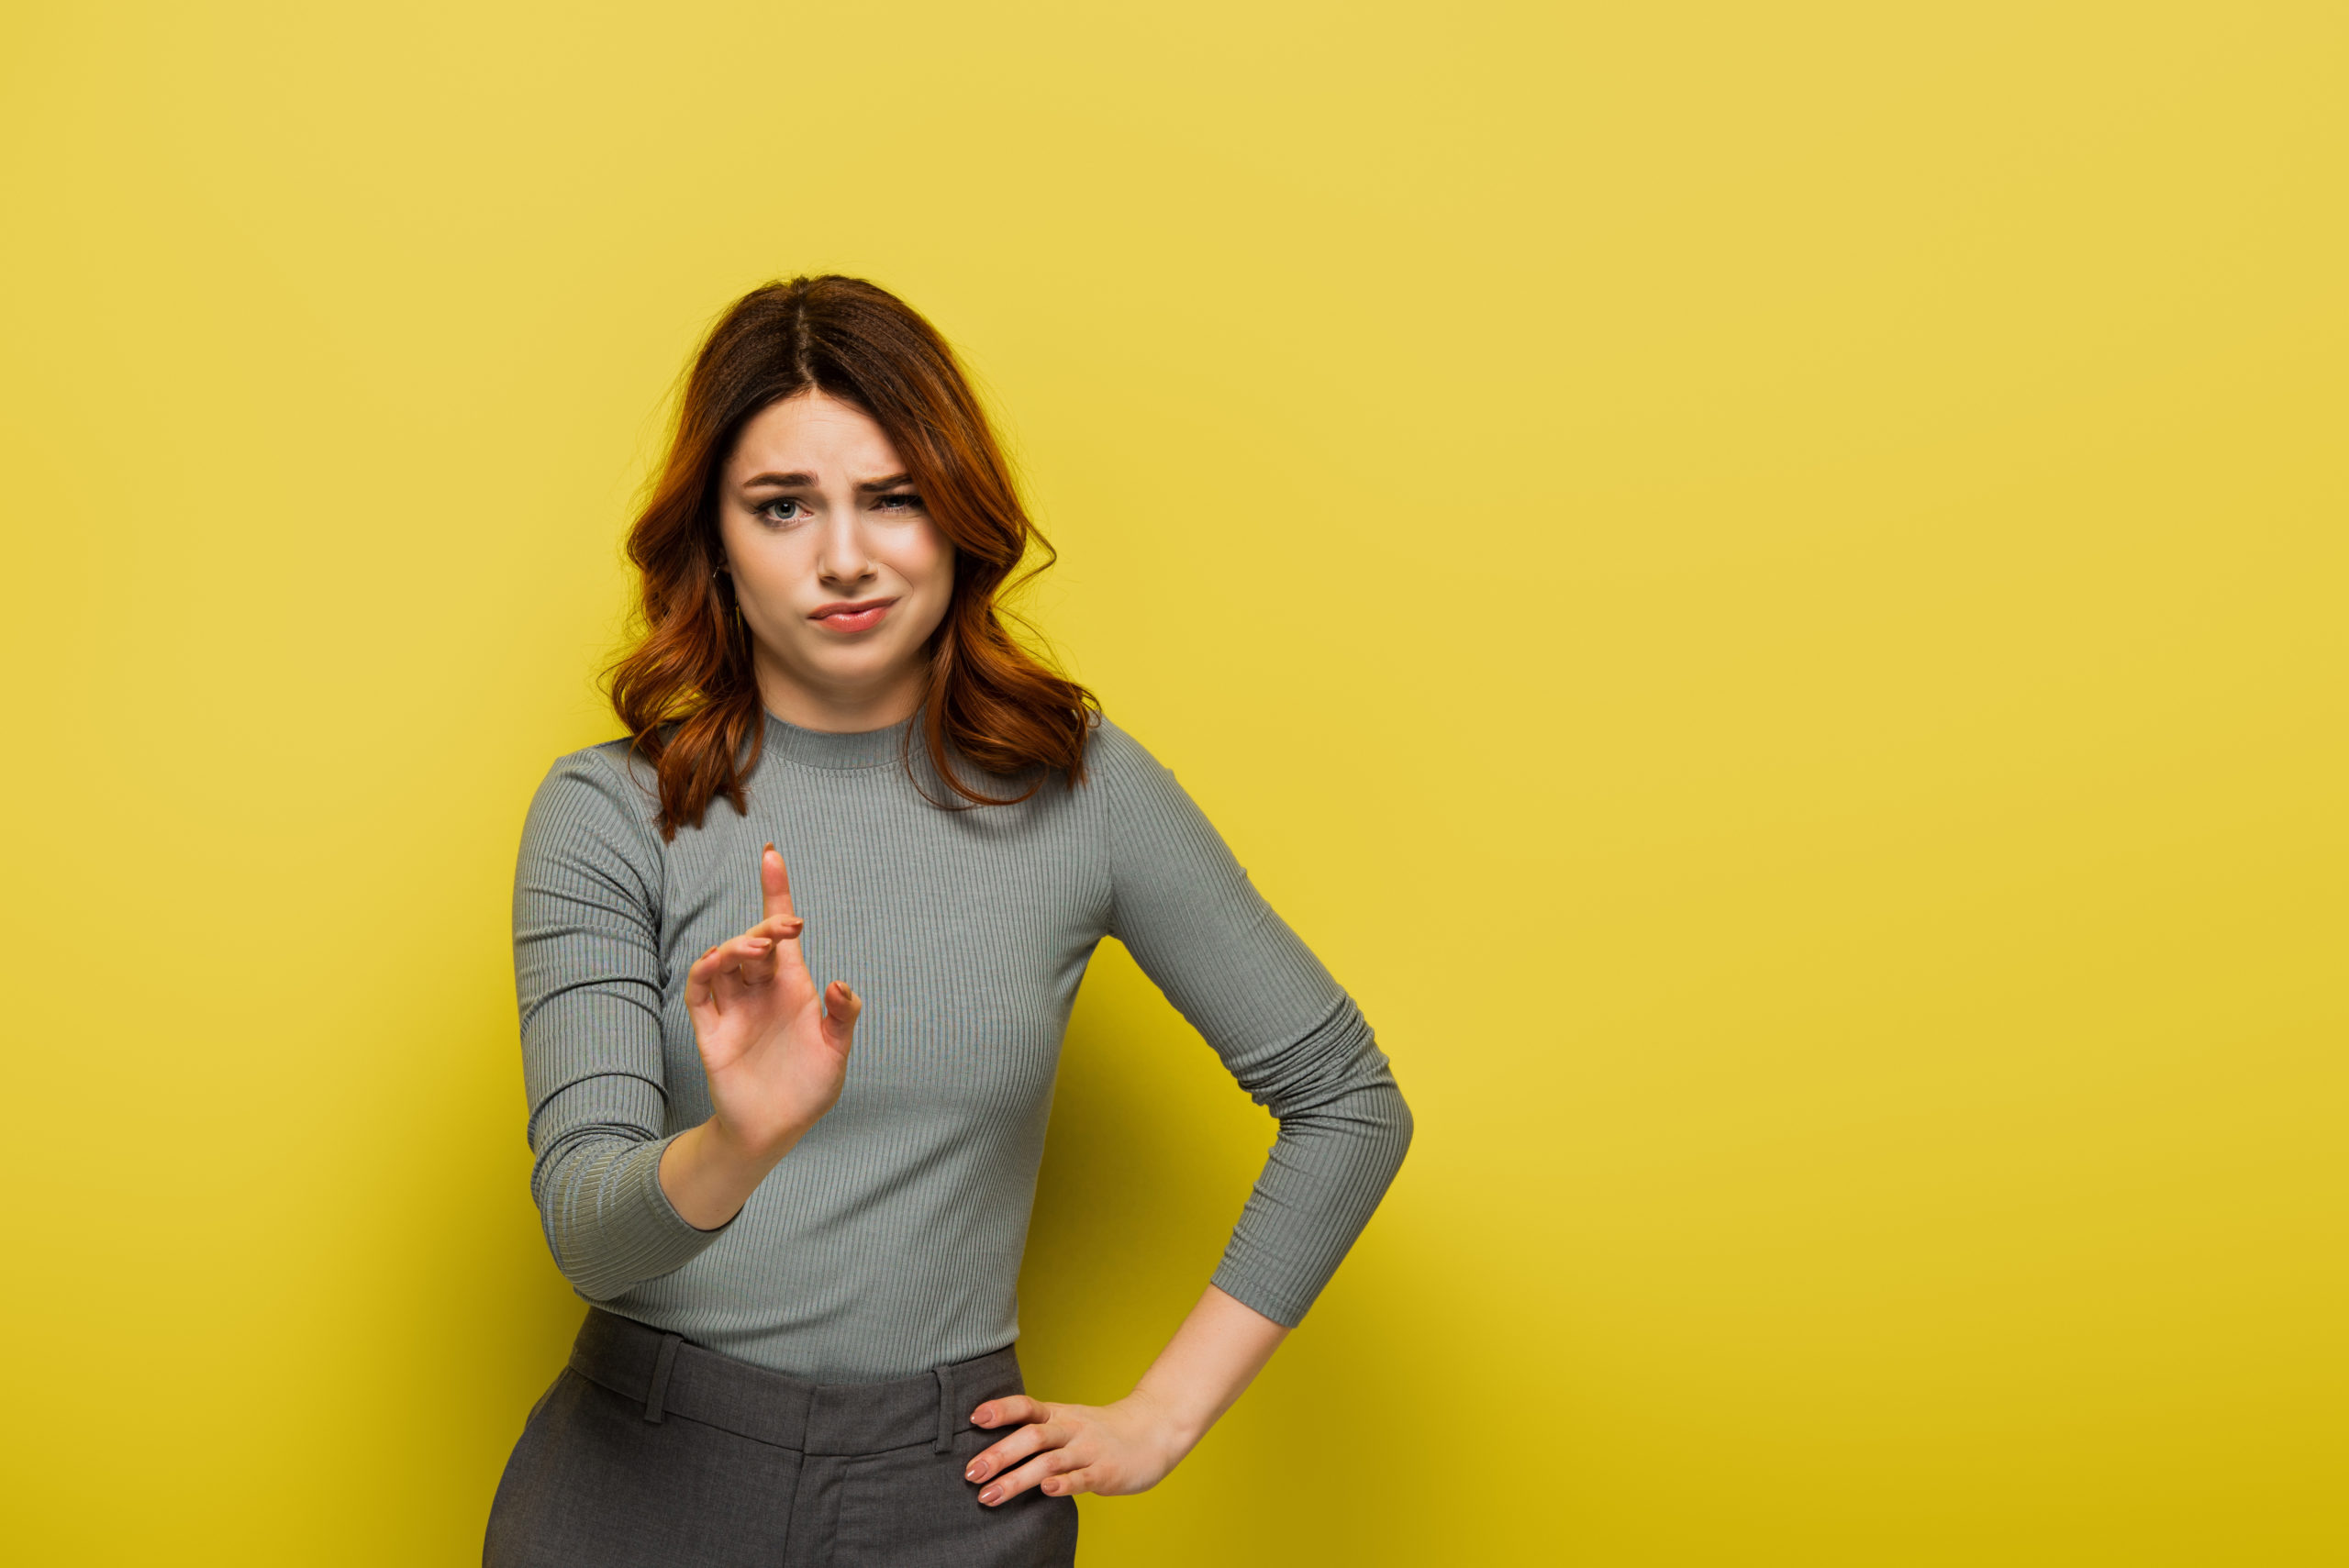 displeased woman standing with hand on hip and pointing with finger while showing no sign on yellow